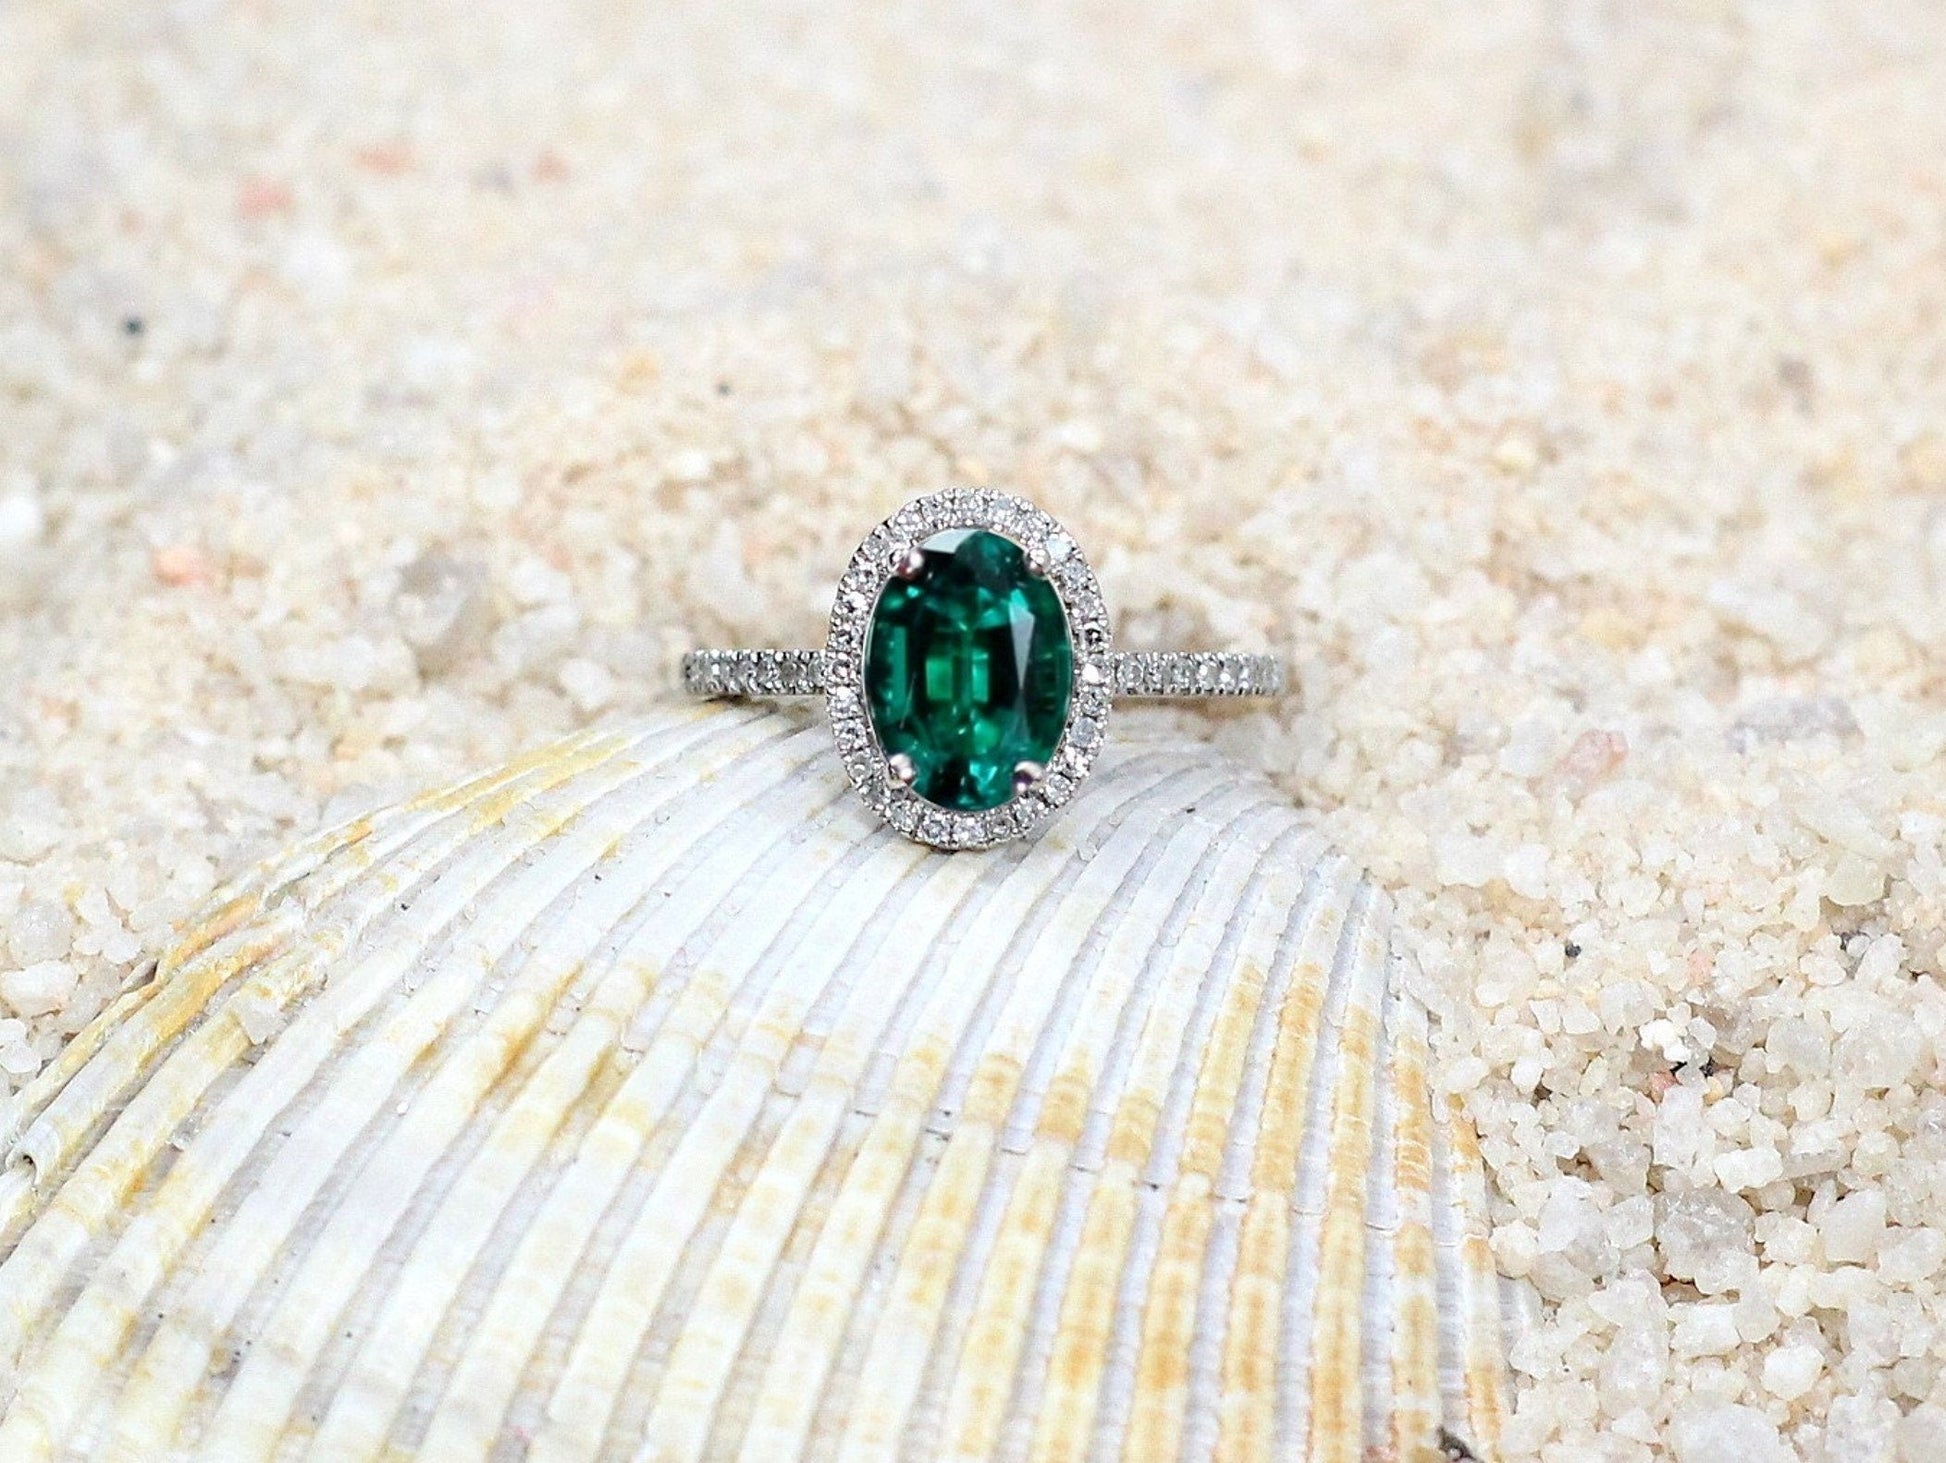 2ct Oval Halo Green Emerald Engagement Ring , Oval Halo Ring, Emerald Diamond Ring, Bridal Gold Ring, May Birthstone, Ovale Medio 8x6mm BellaMoreDesign.com